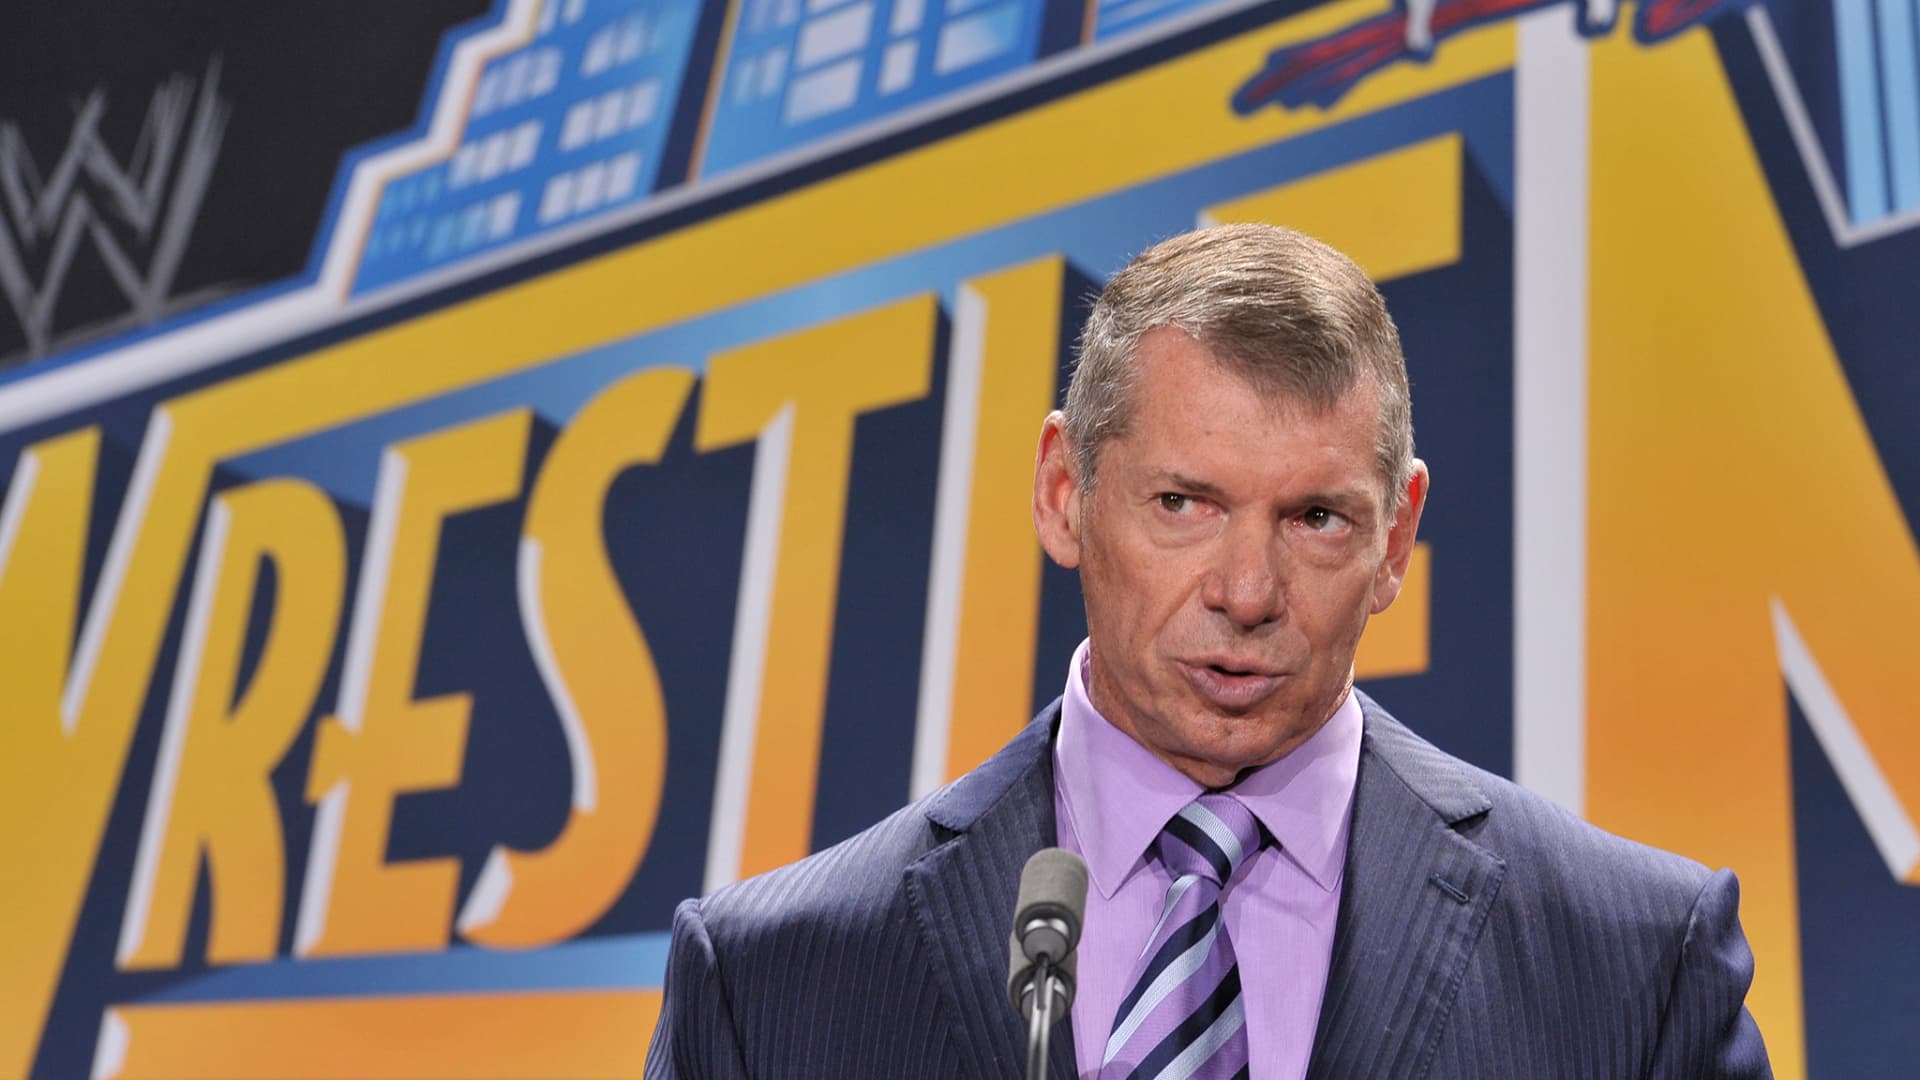 WWE boss Vince McMahon to step back from CEO duties during misconduct probe